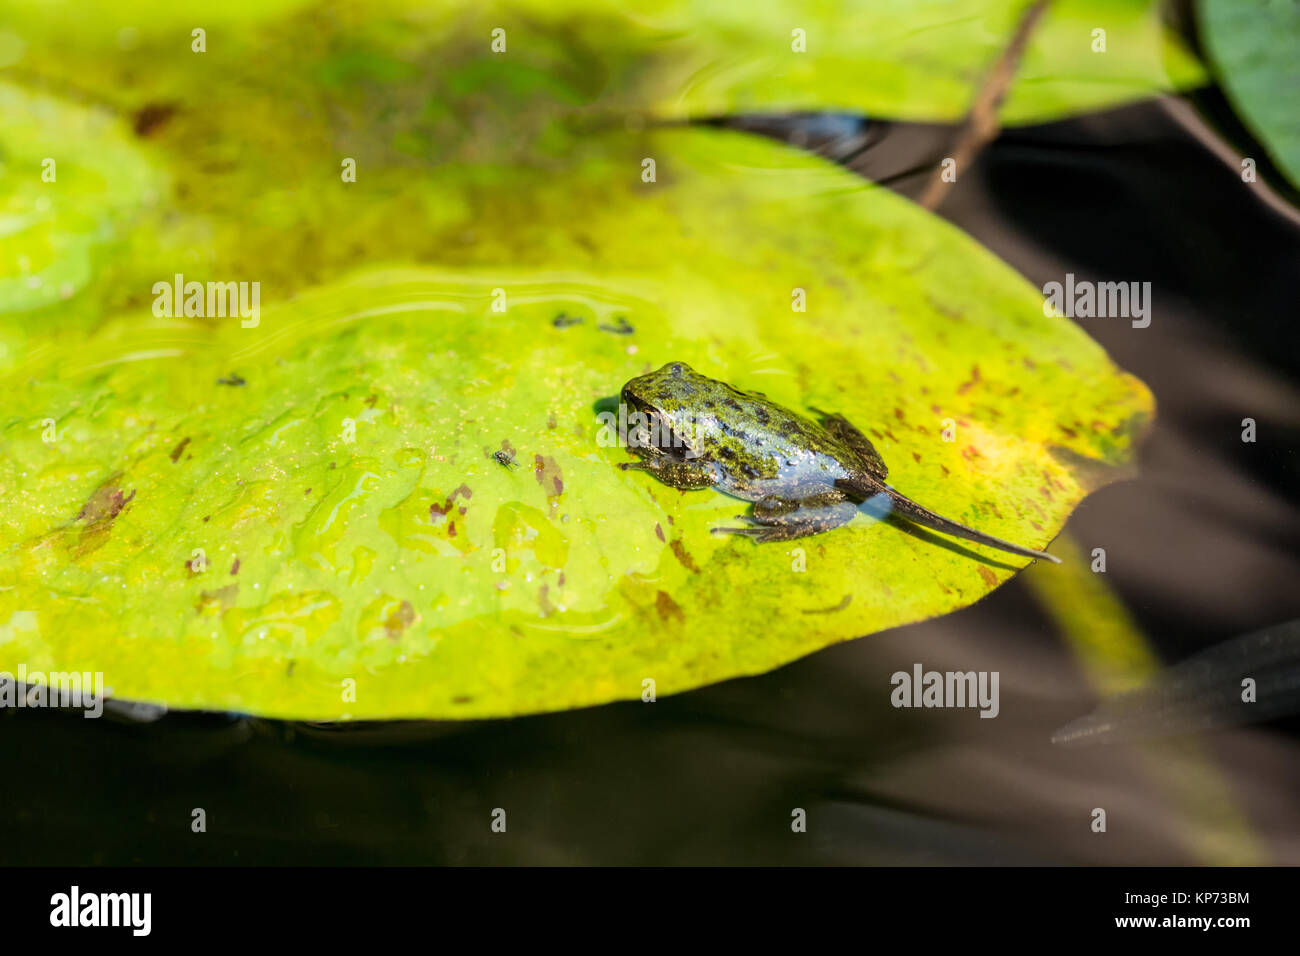 Pacific Tree Frog or Pacific Chorus Frog (Pseudacris regilla) in the tadpole with four legs stage, resting on a water lily pad in a pond in Issaquah,  Stock Photo